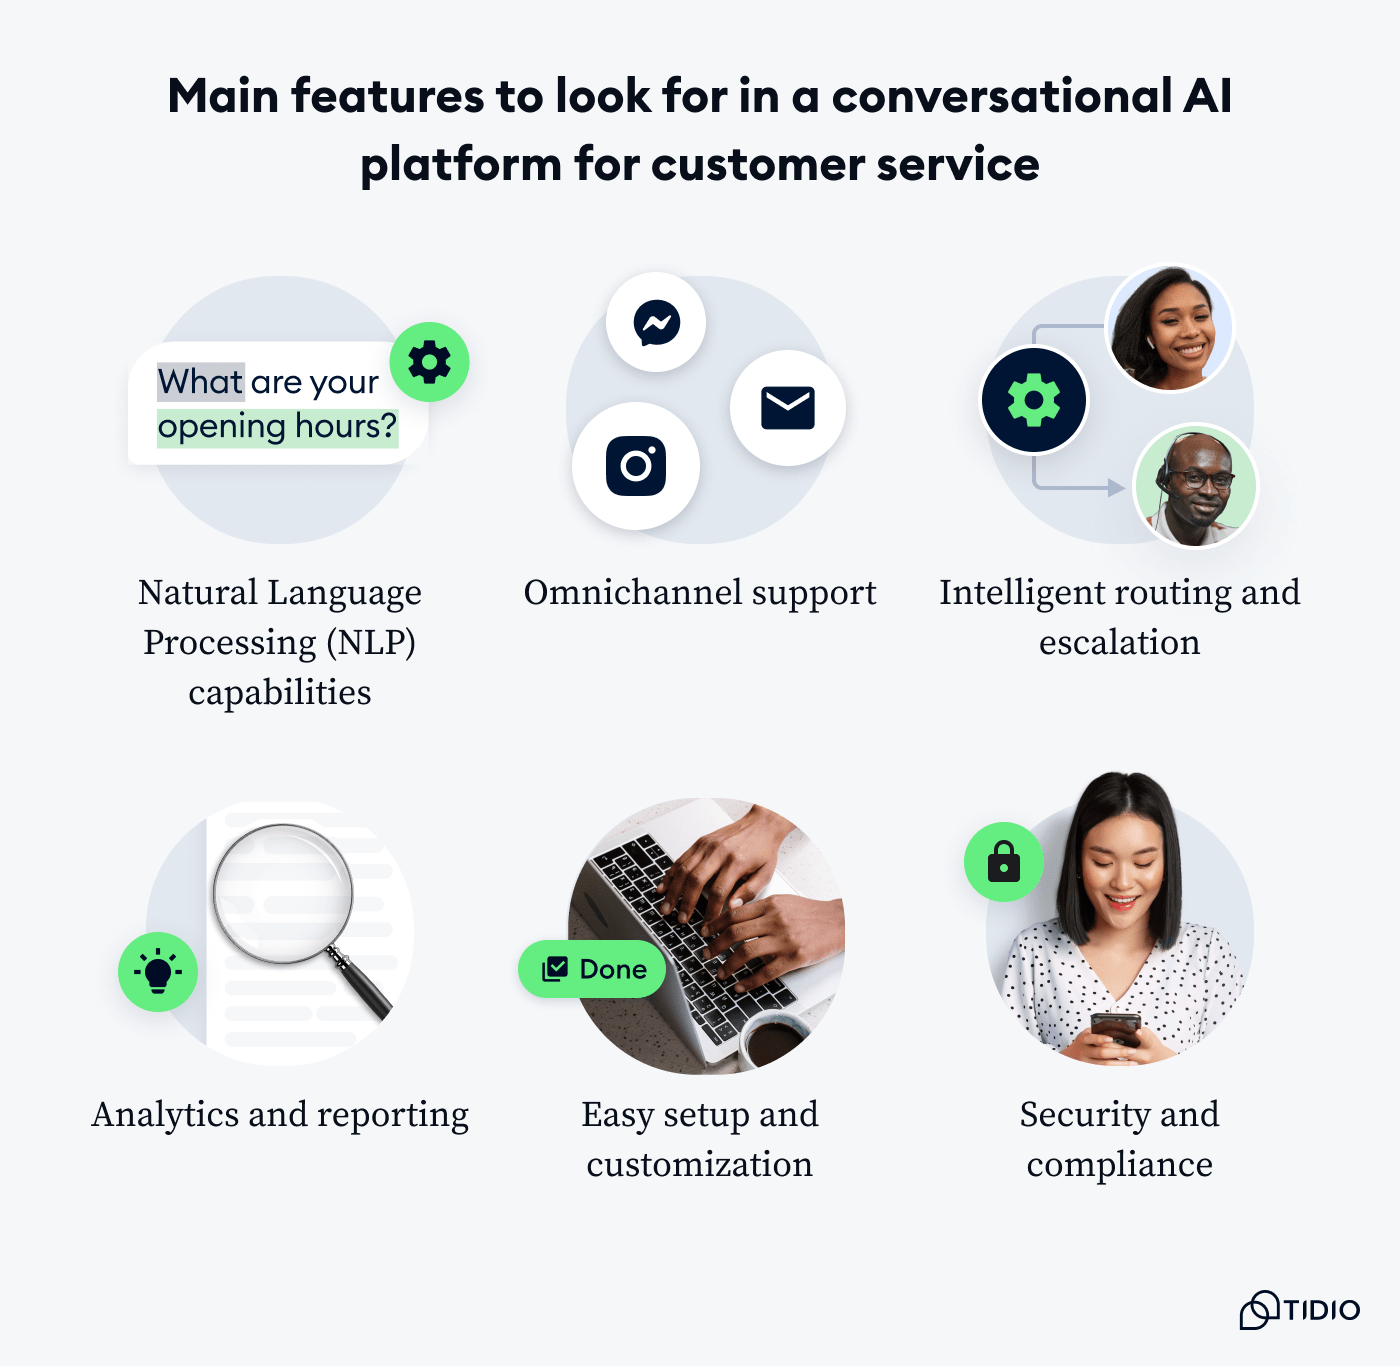 Main features to look for in a conversational AI platform for customer service 